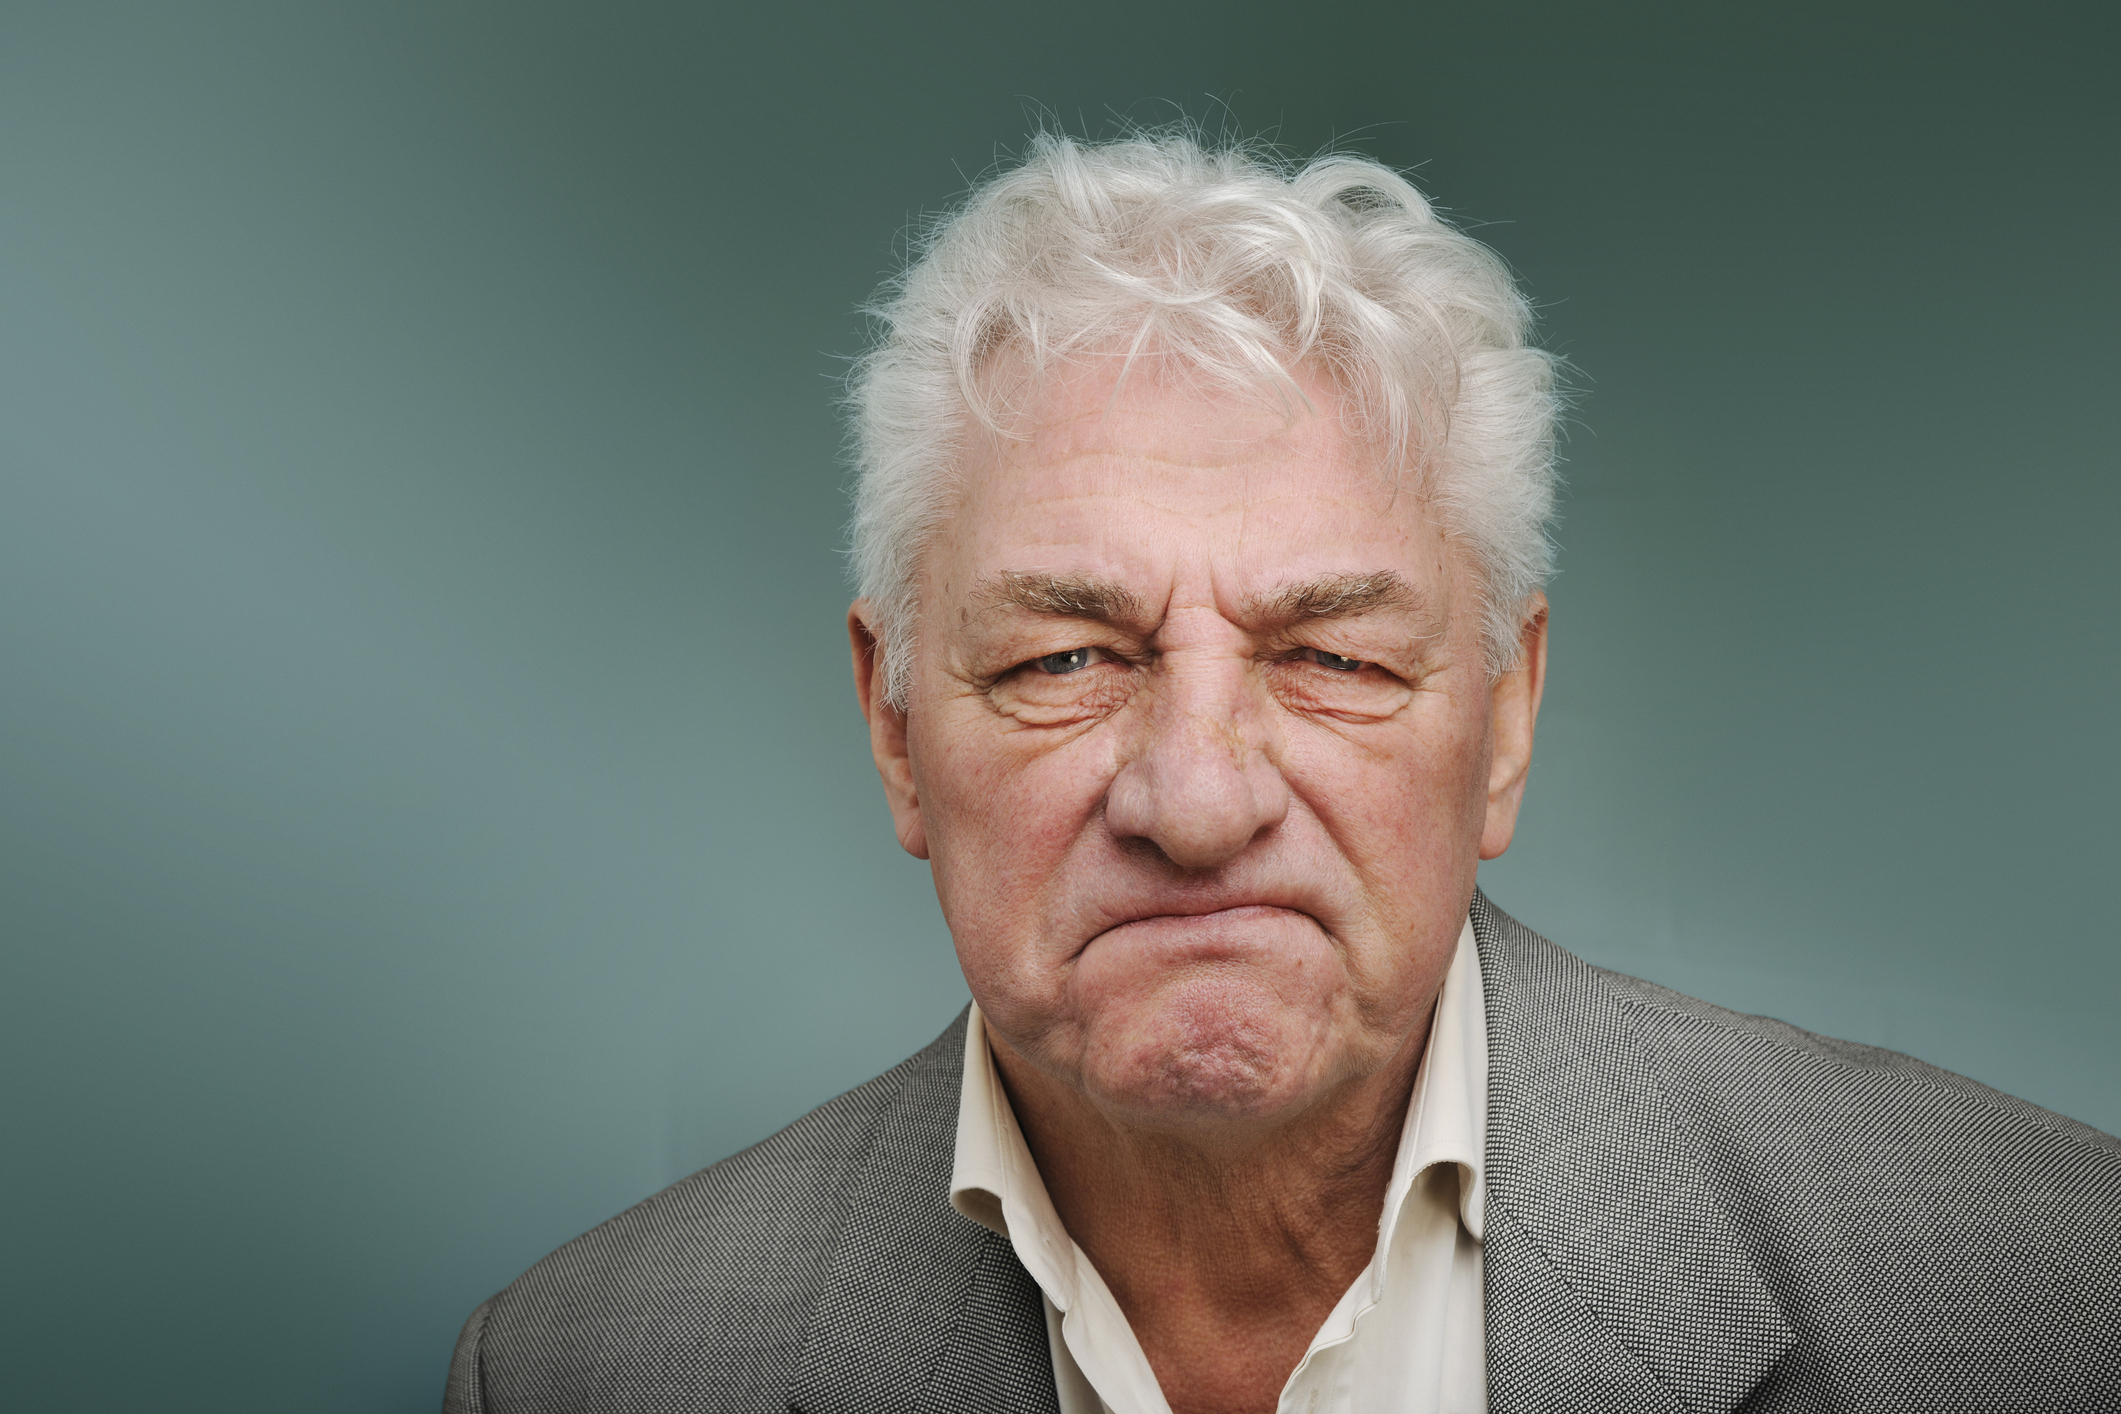 Older man with a discontent expression wearing a white shirt and gray jacket